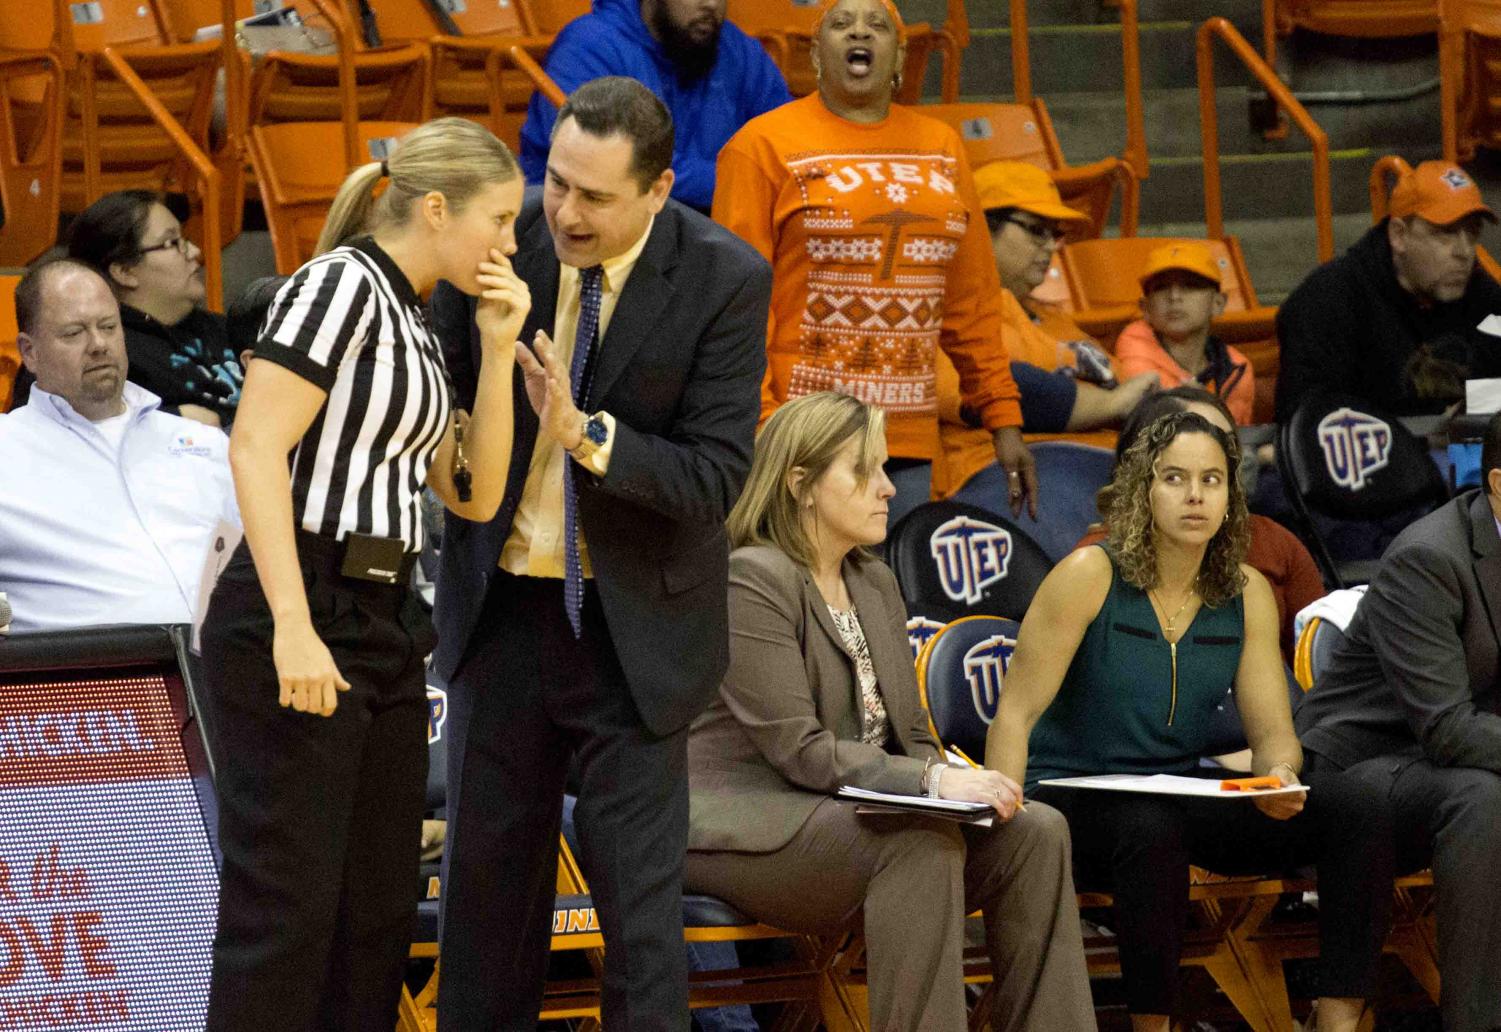 New+Mexico+hands+UTEP+women+first+loss+of+season